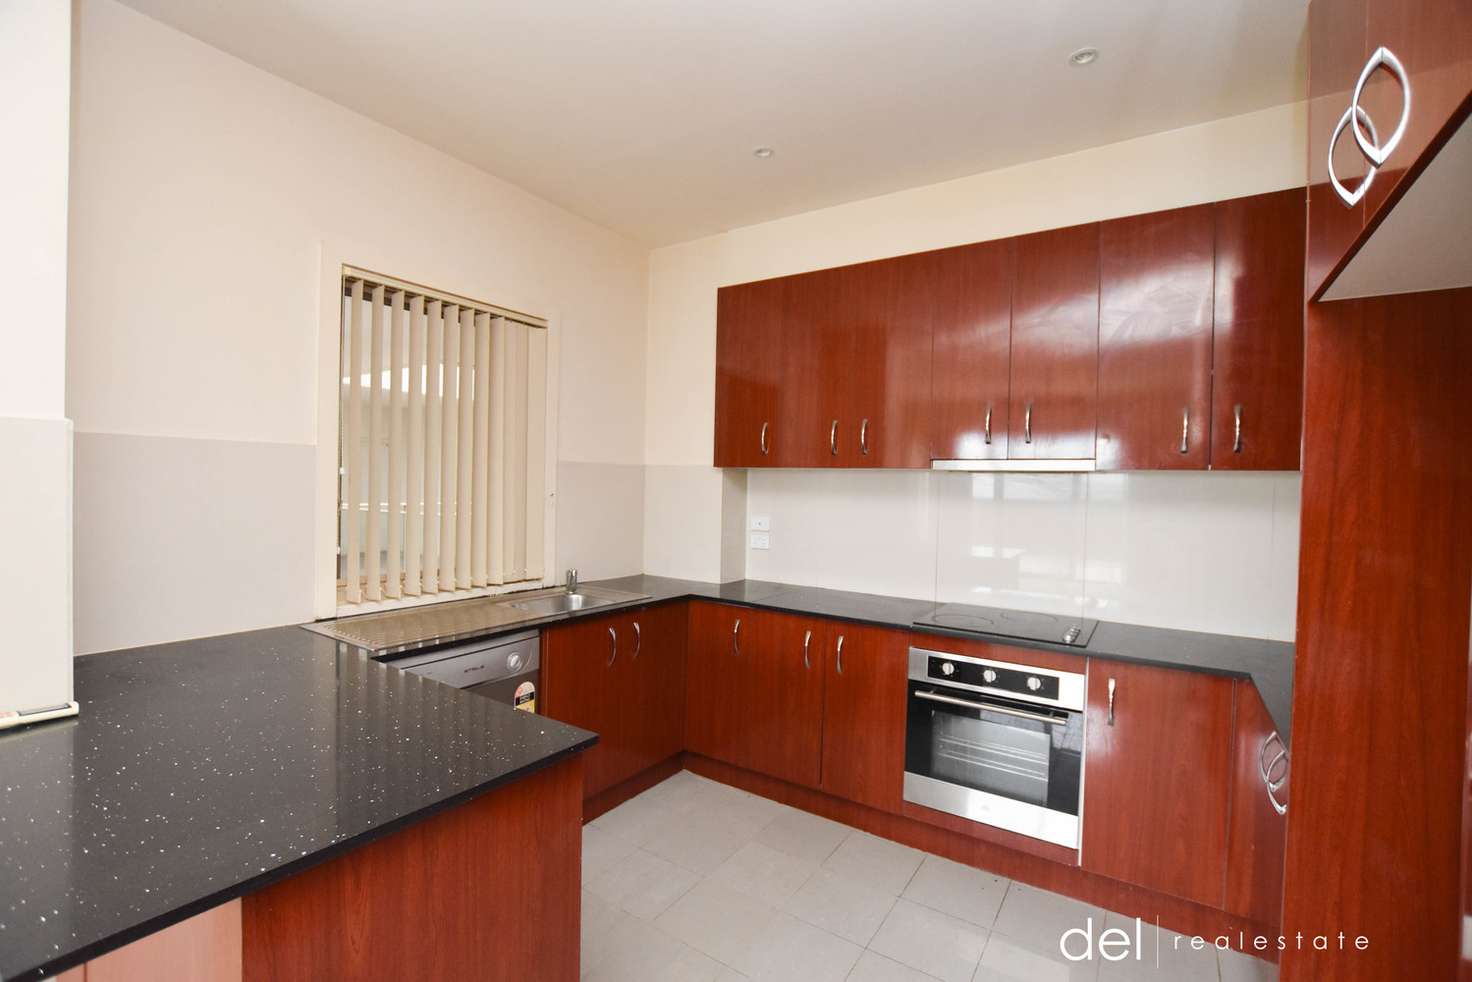 Main view of Homely apartment listing, 21/2-4 Hutton Street, Dandenong VIC 3175